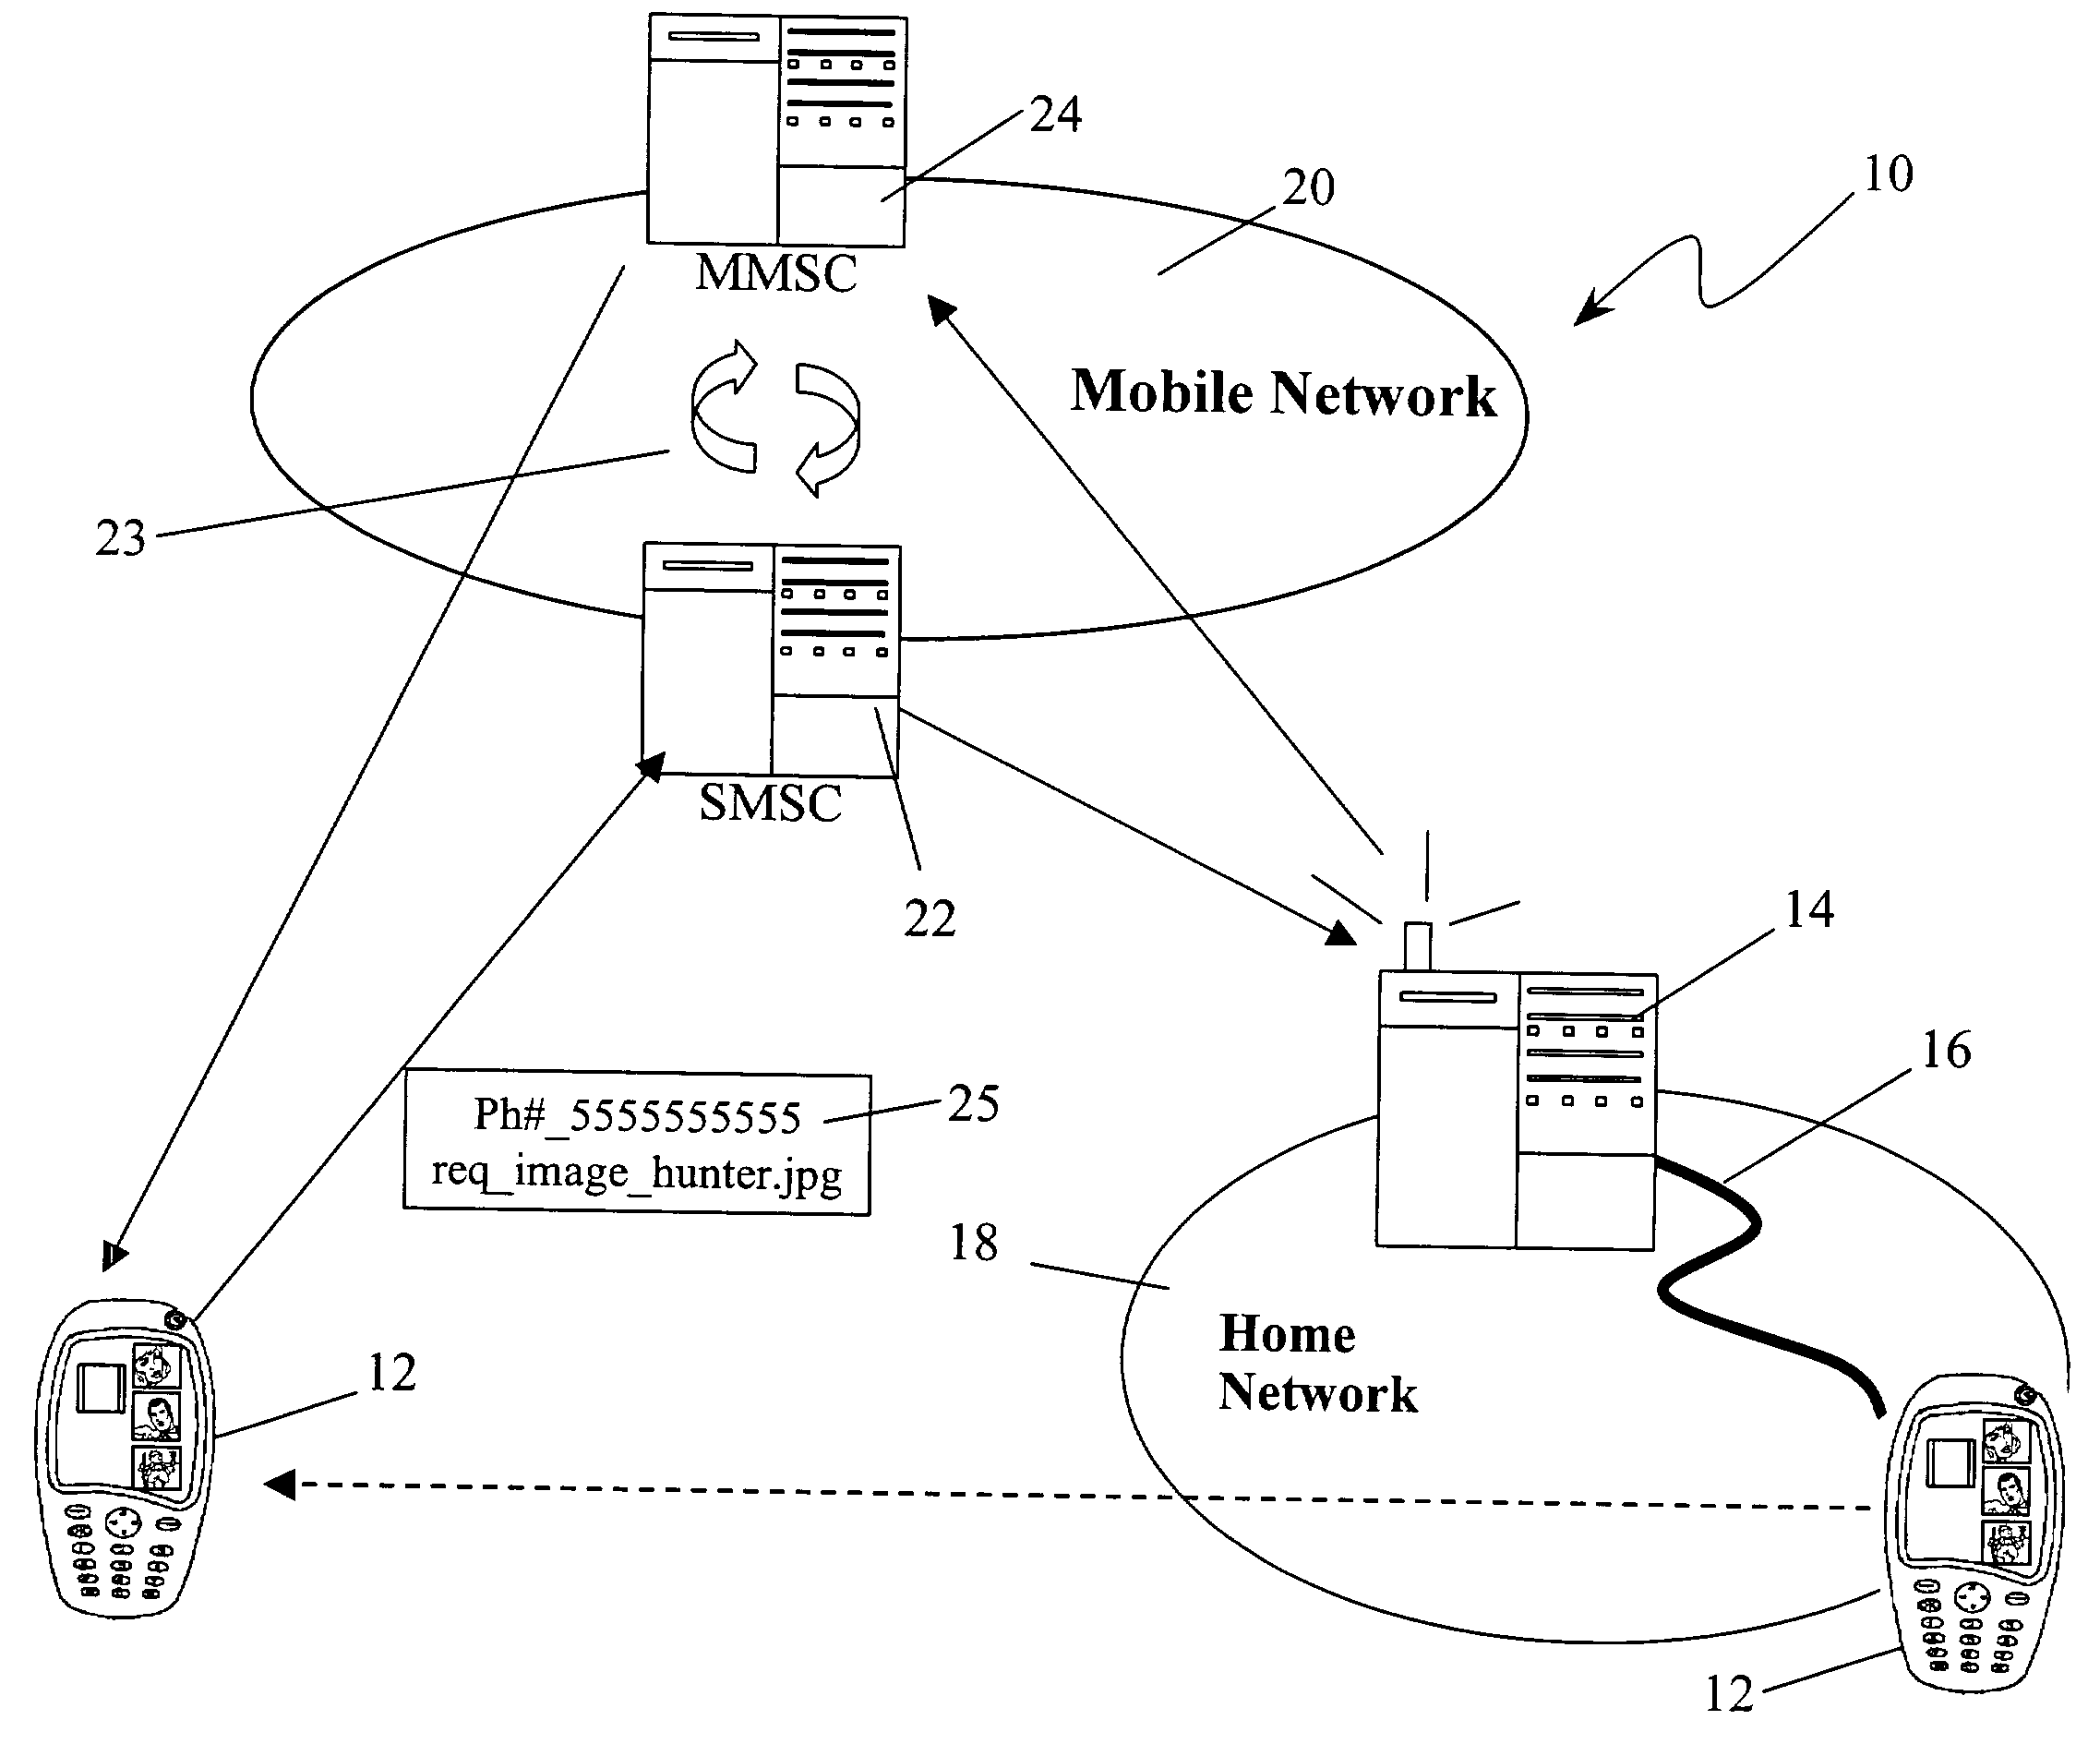 Image browsing and downloading in mobile networks